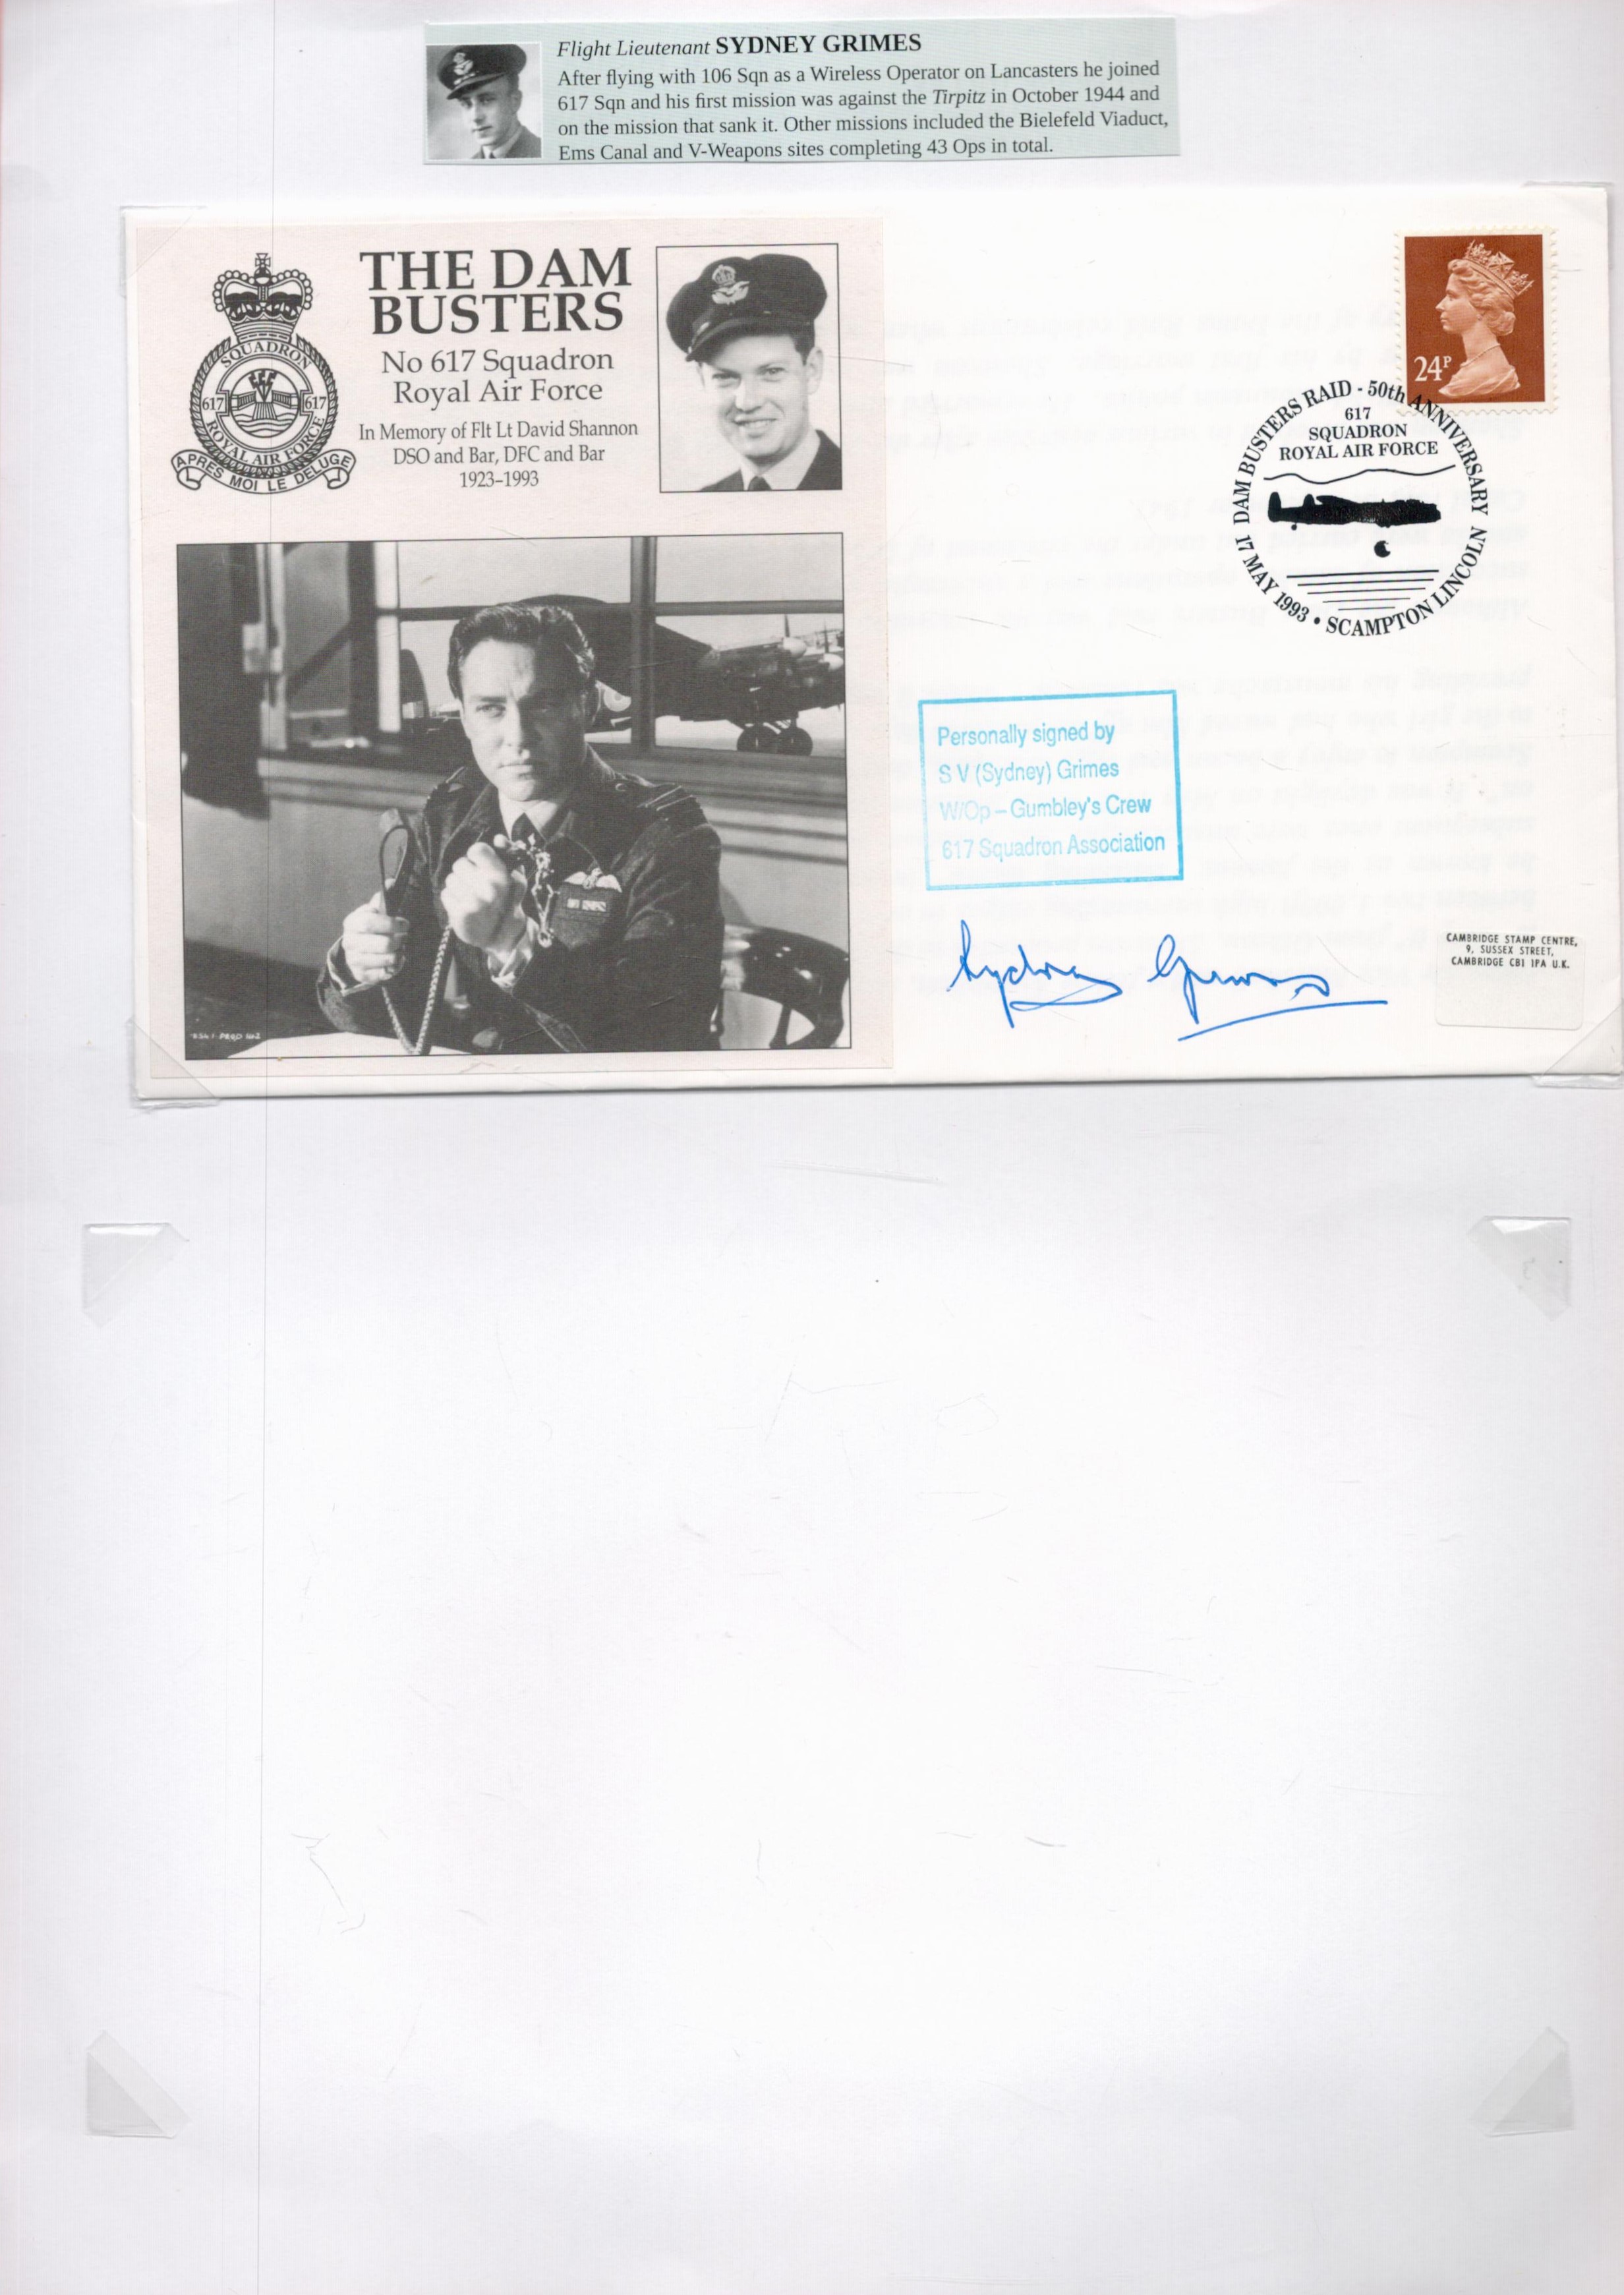 Flt Lt Sydney Grimes (617 Squadron) Signed The Dam Busters FDC. British Stamp and postmark. Grimes